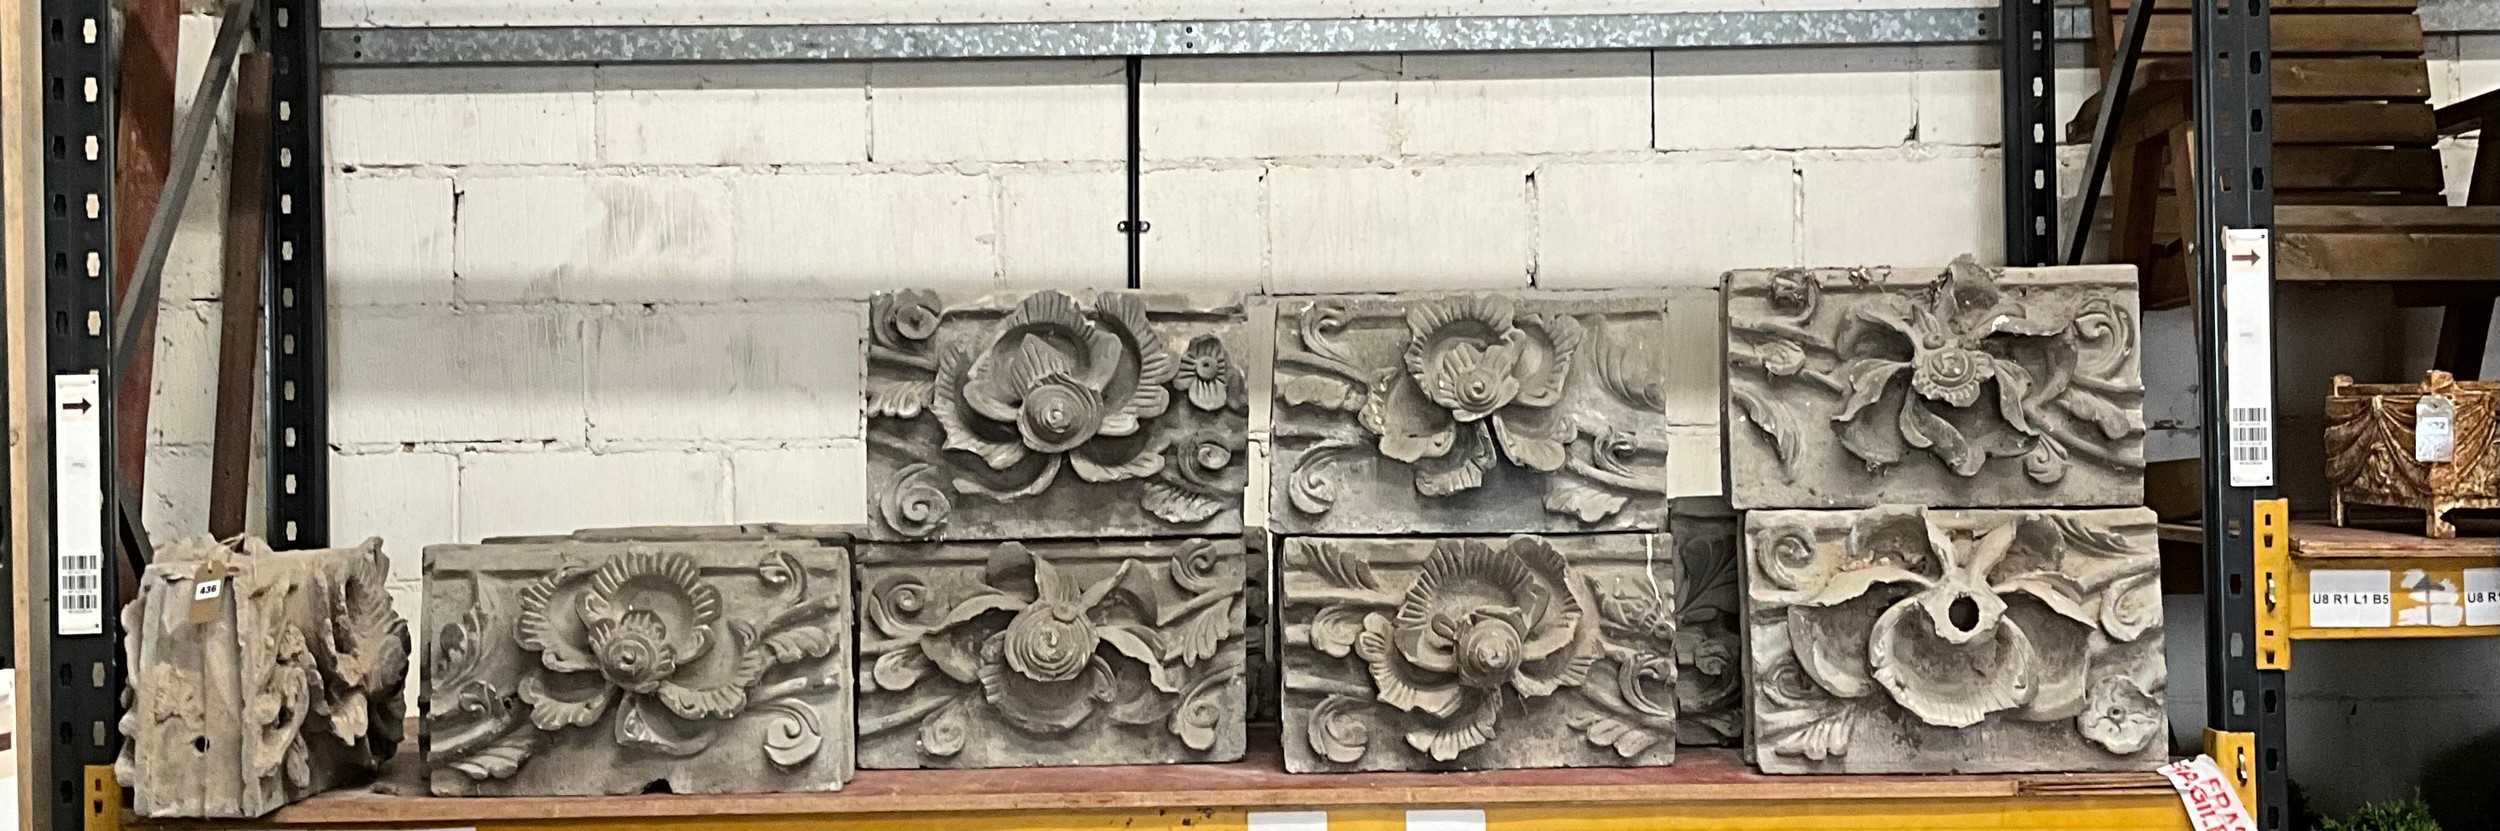 An impressive group of 21 Chinese fired clay / stoneware architectural / roof frieze blocks, each